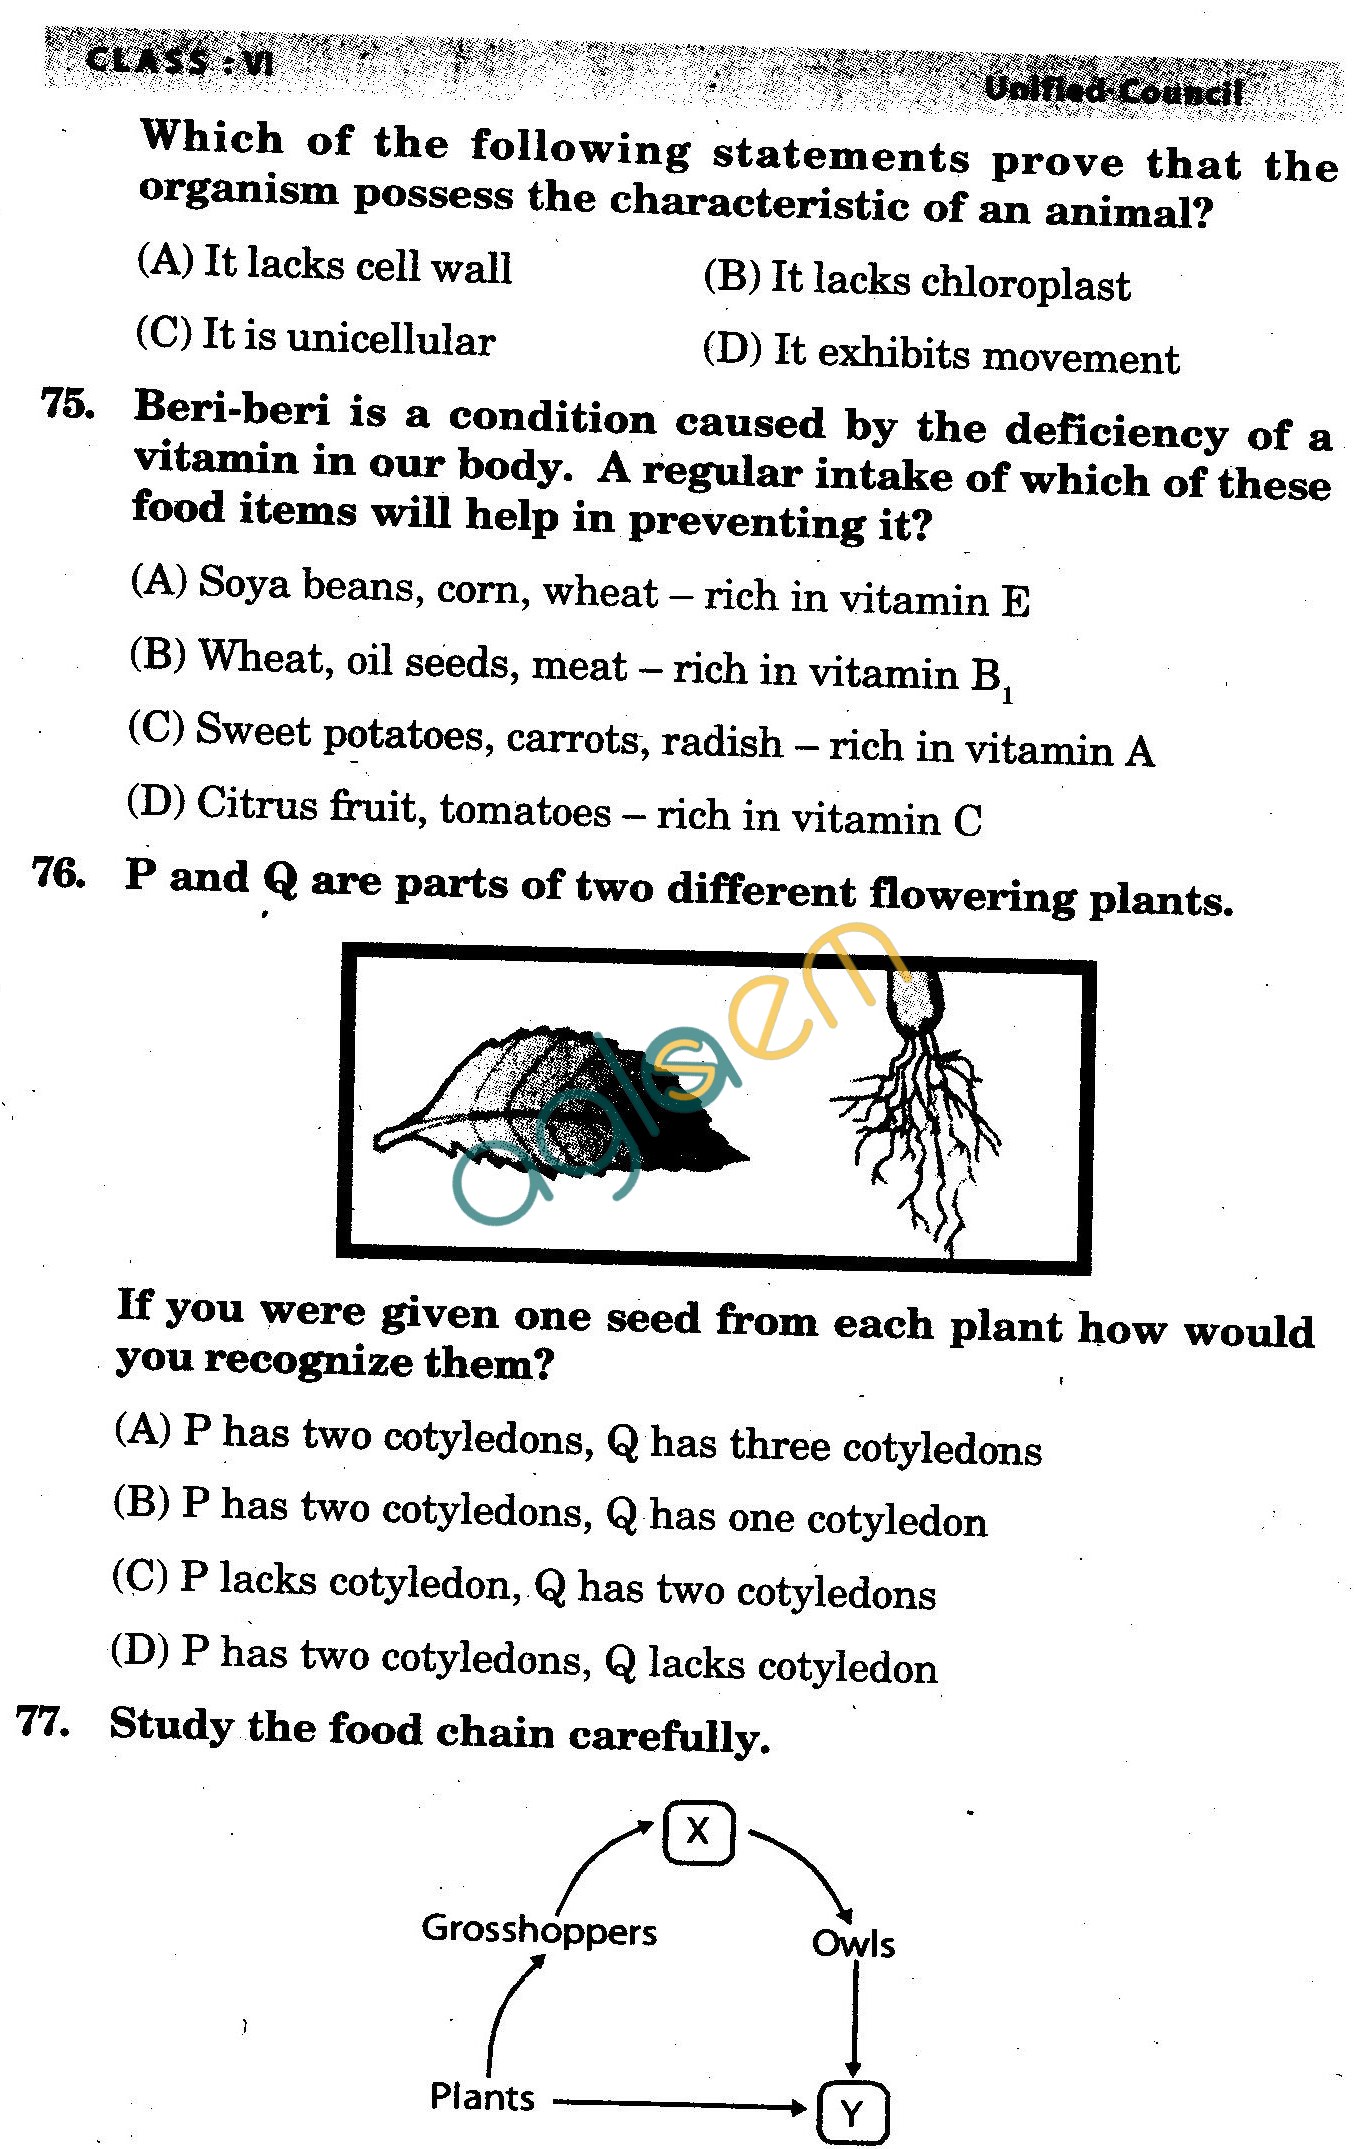 NSTSE 2010: Class VI Question Paper with Answers - Biology